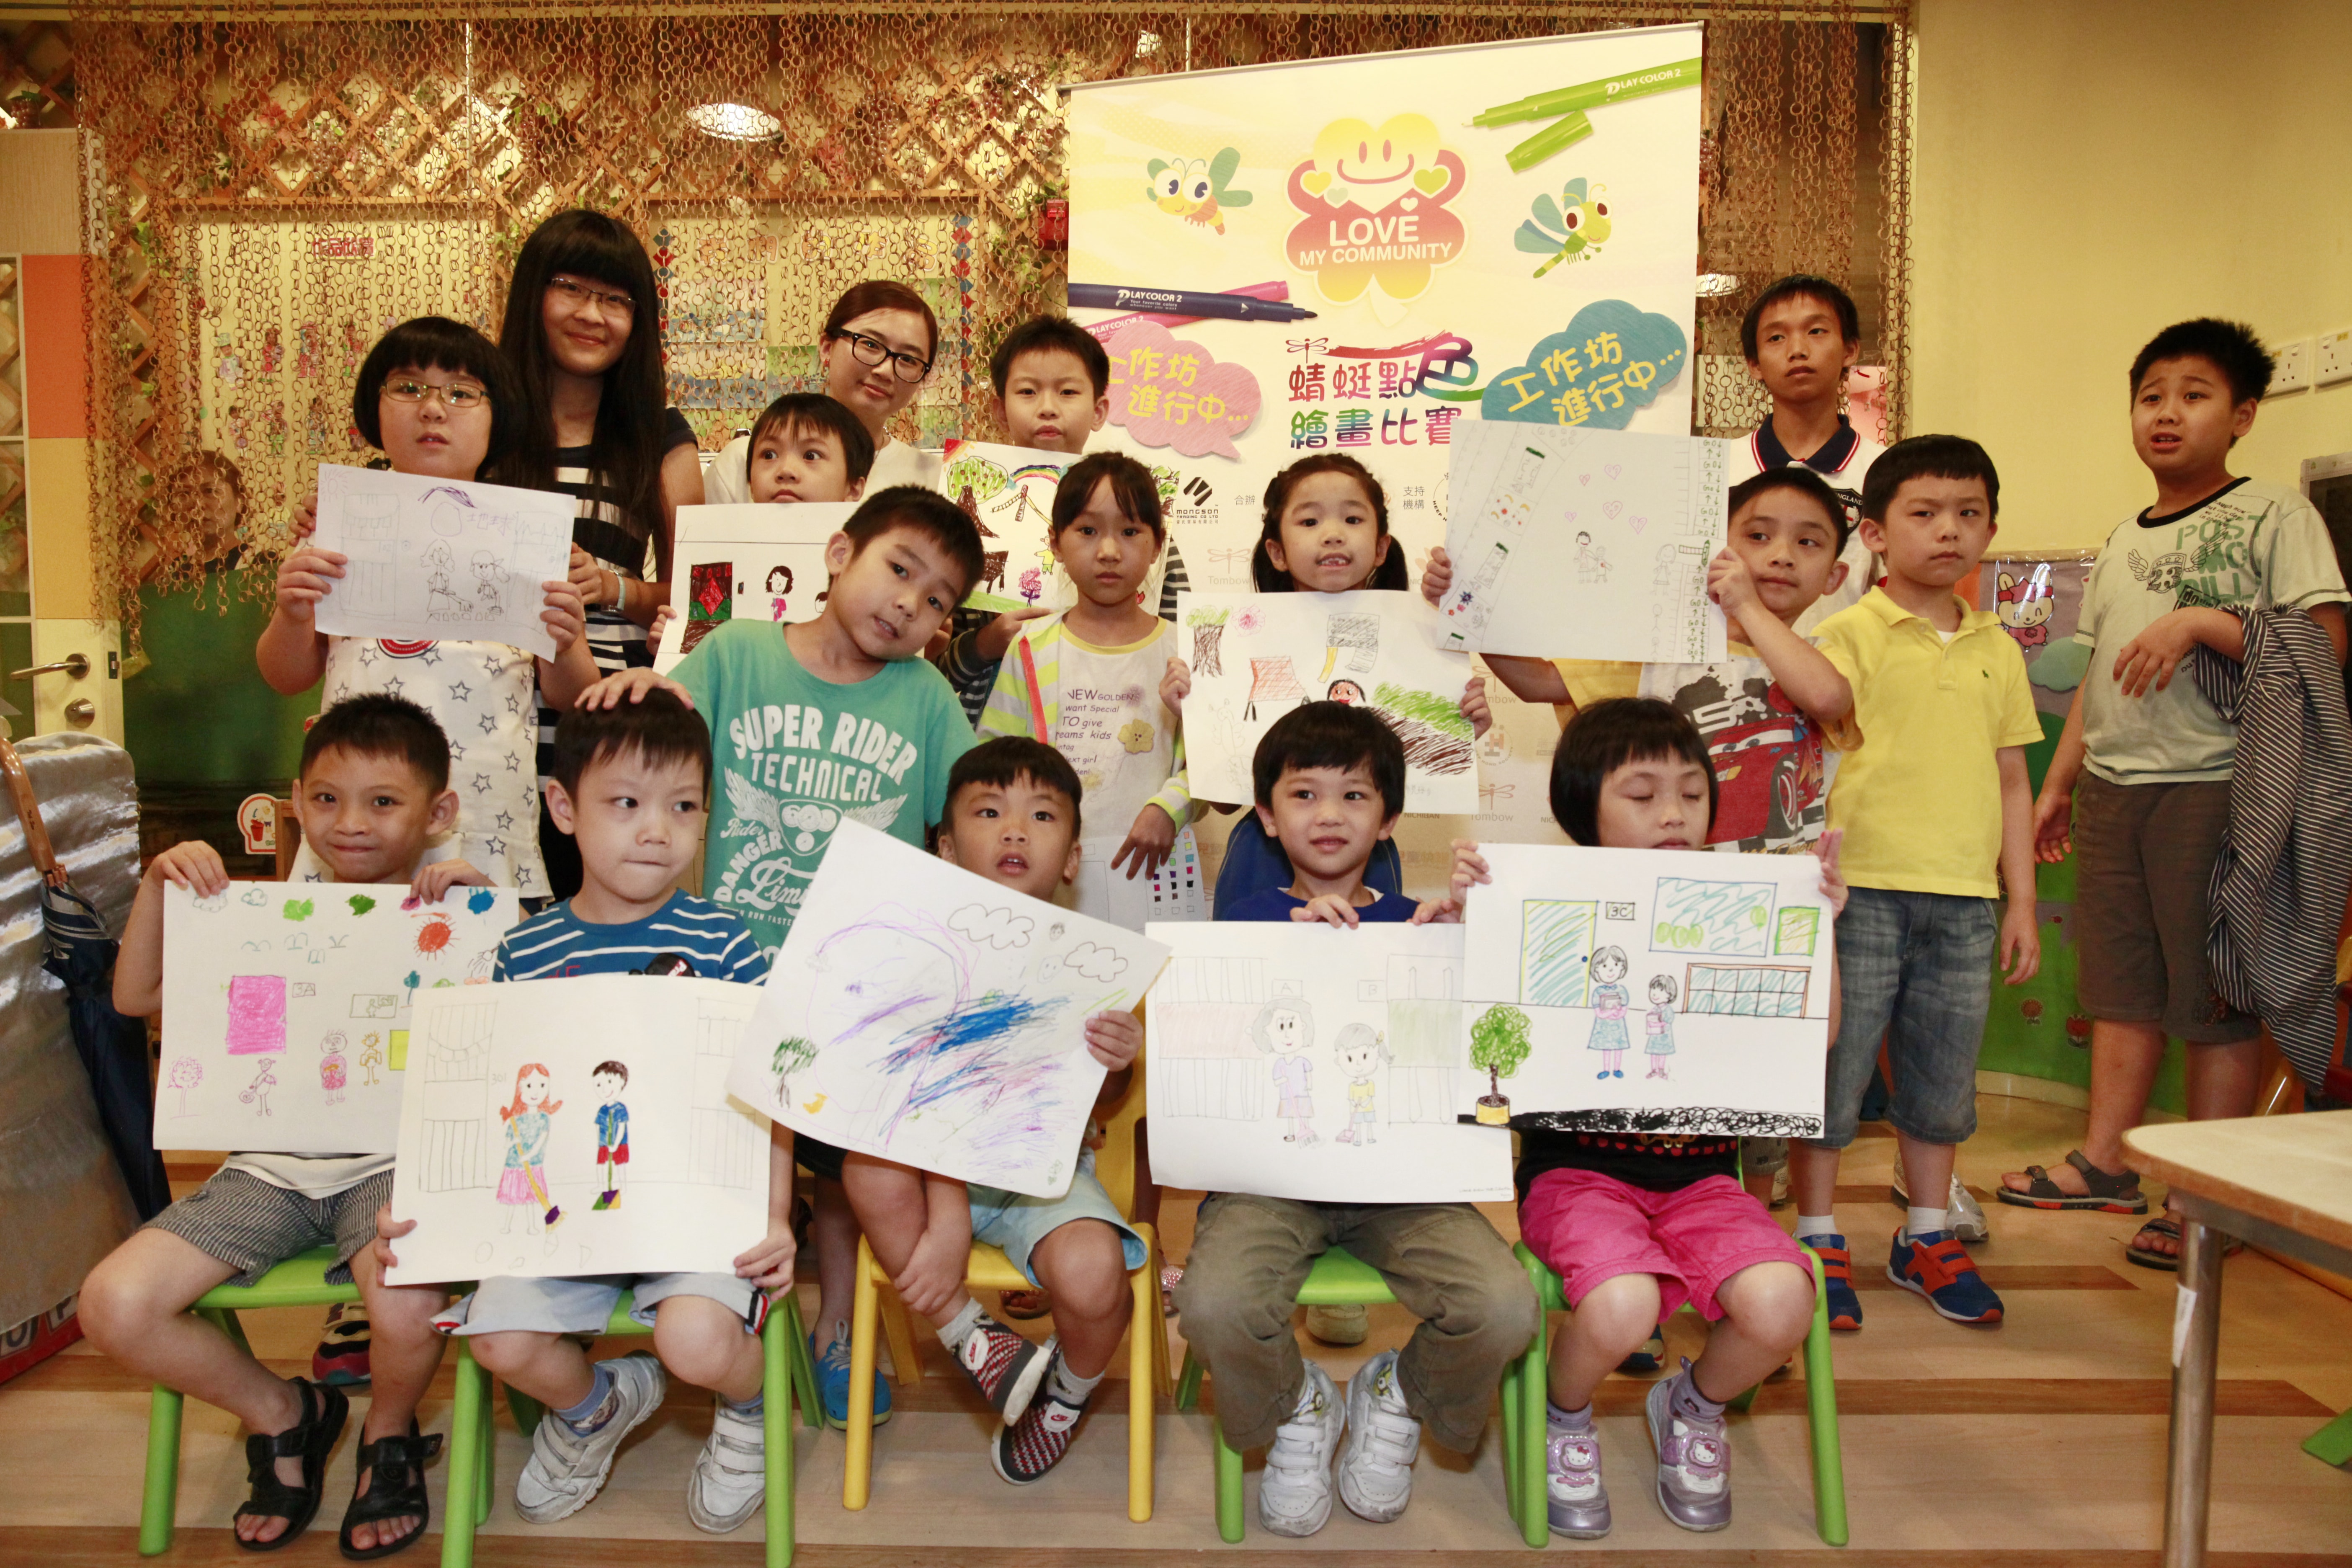 Mongson Trading Company Limited, Swiss Art Studio and Heep Hong Society jointly launched the ‘Love My Community’ Campaign in summer 2014.